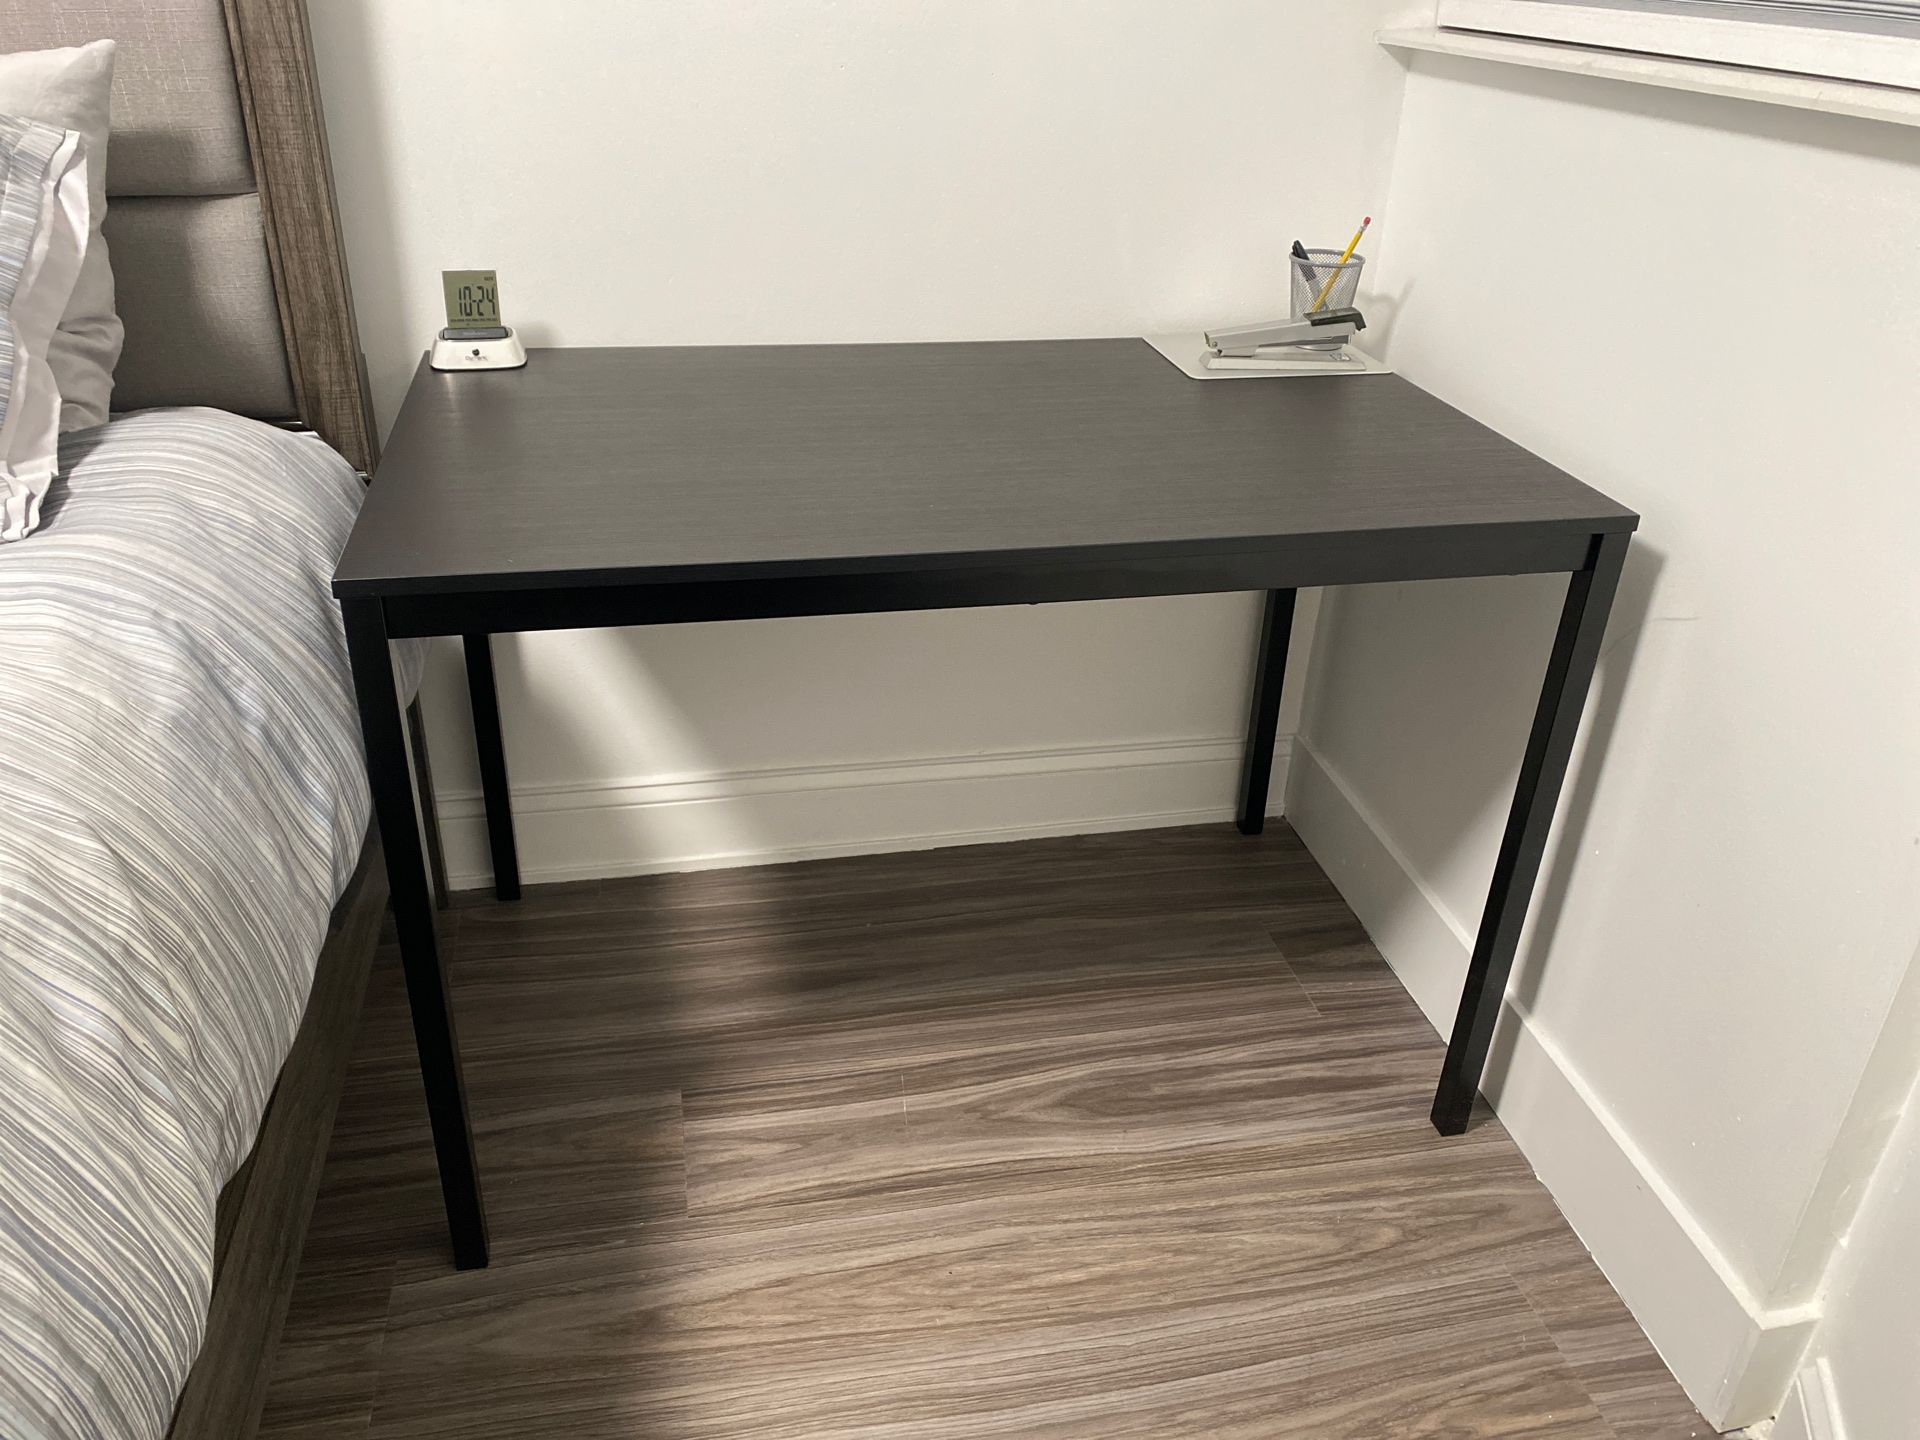 Table like desk or dinning table